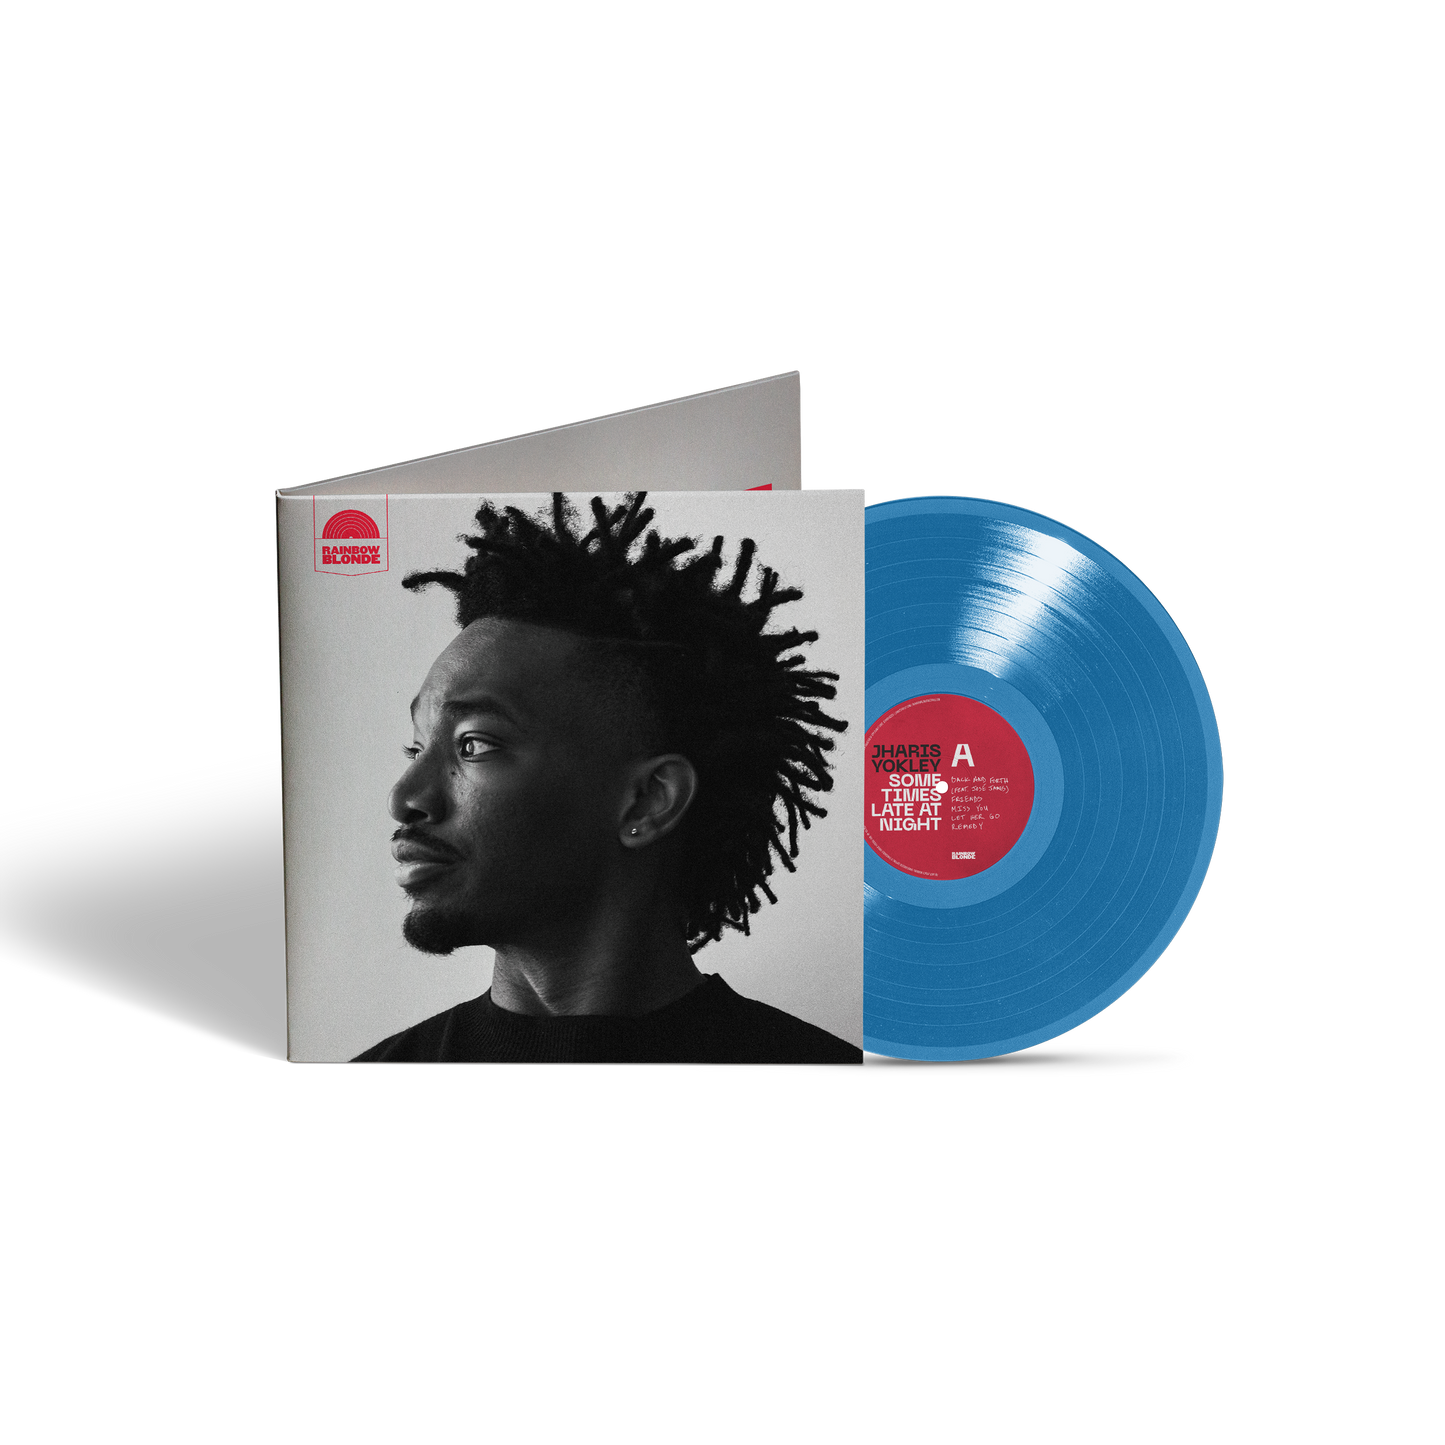 Sometimes, Late At Night - Limited Edition 180 gram blue vinyl (Press of 500)